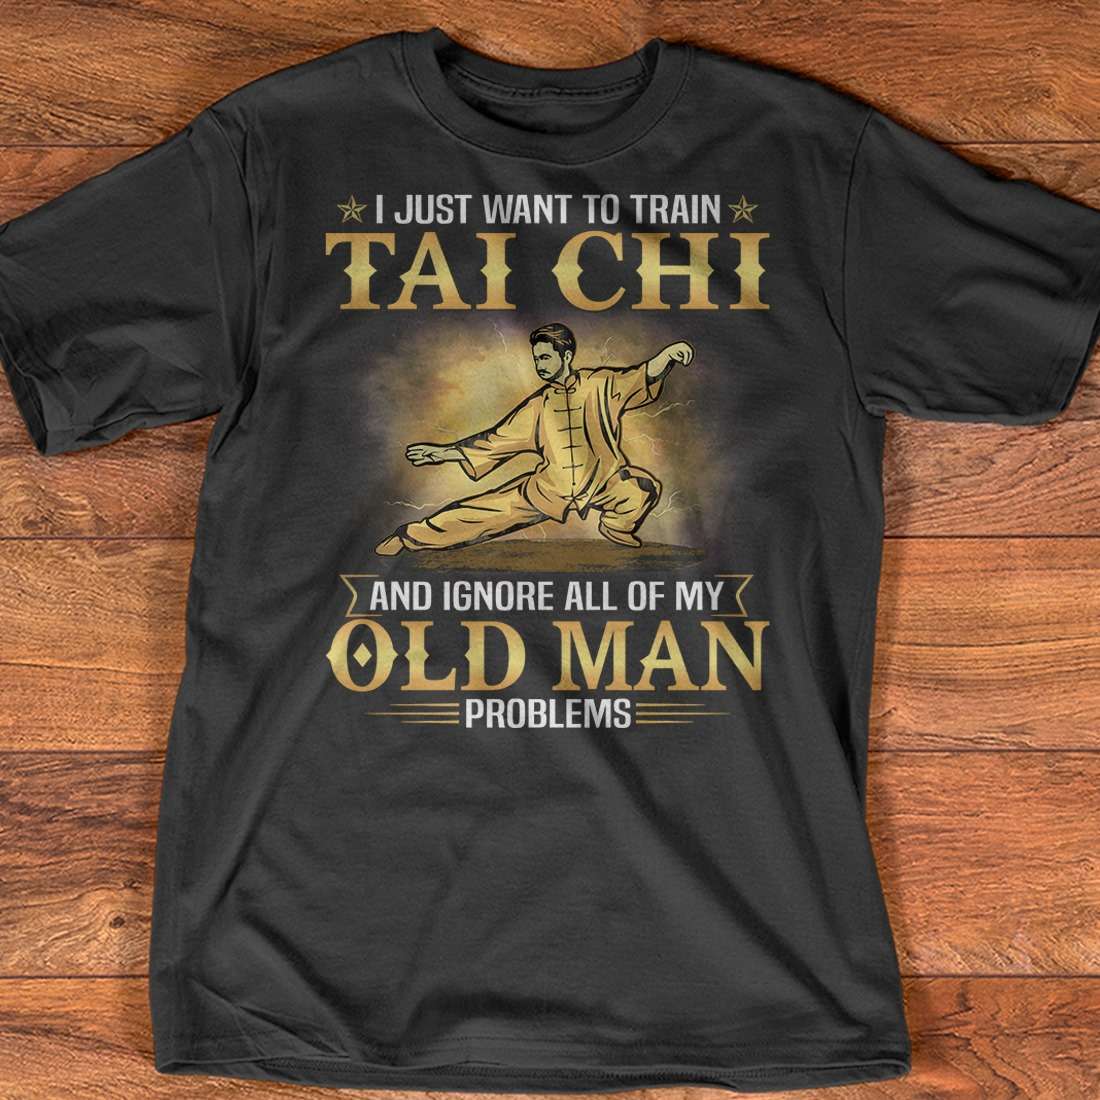 I jsut want to train Tai Chi and ignore all of my old man problems - Tai Chi trainer